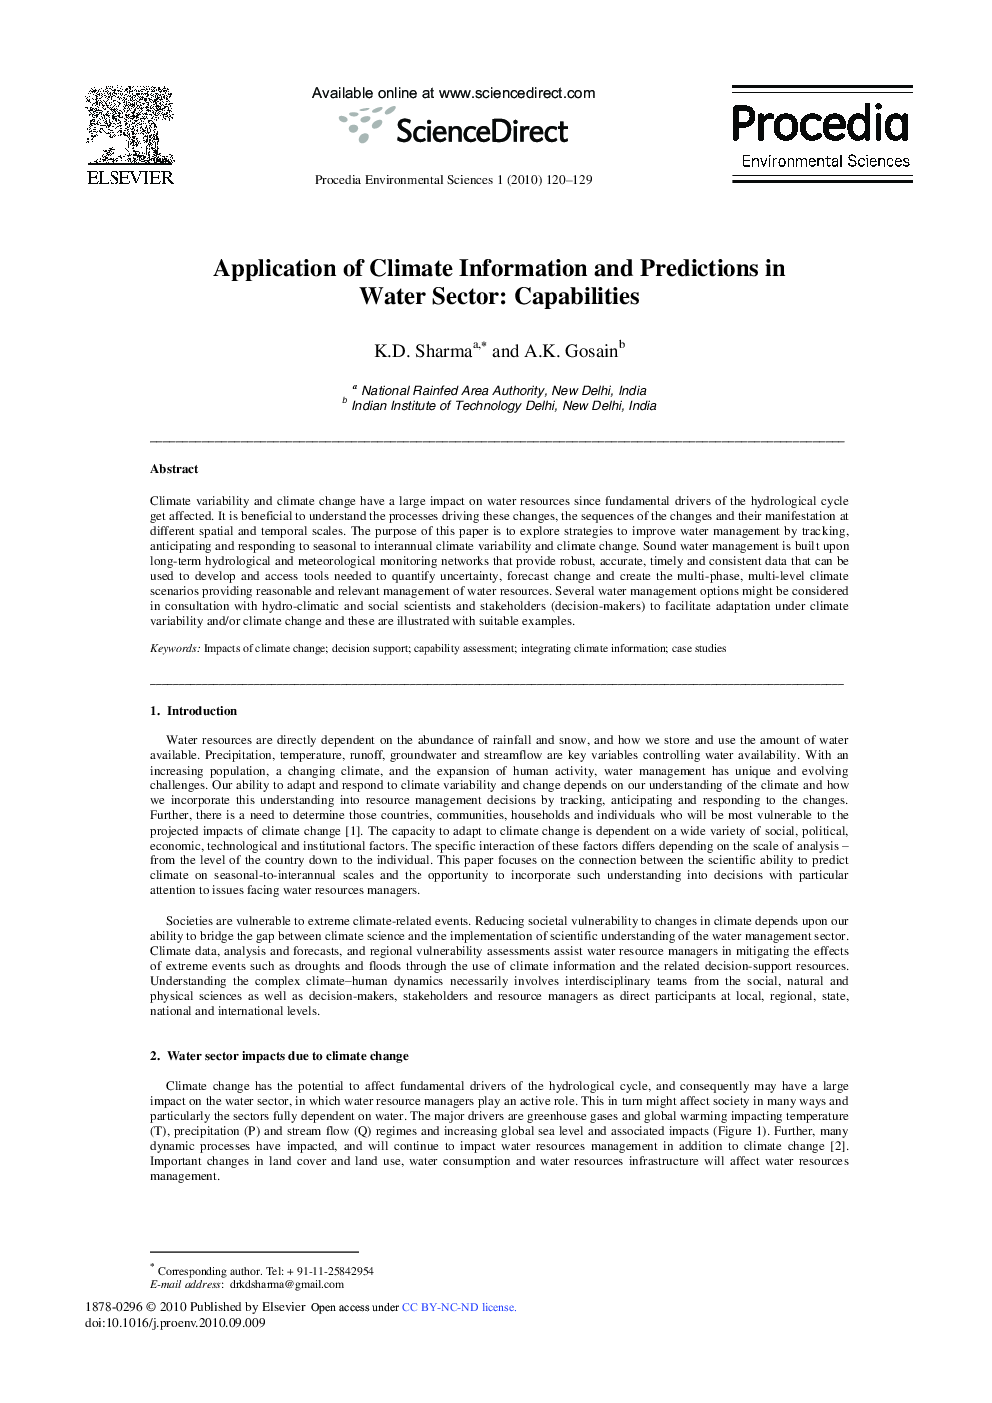 Application of Climate Information and Predictions in Water Sector: Capabilities